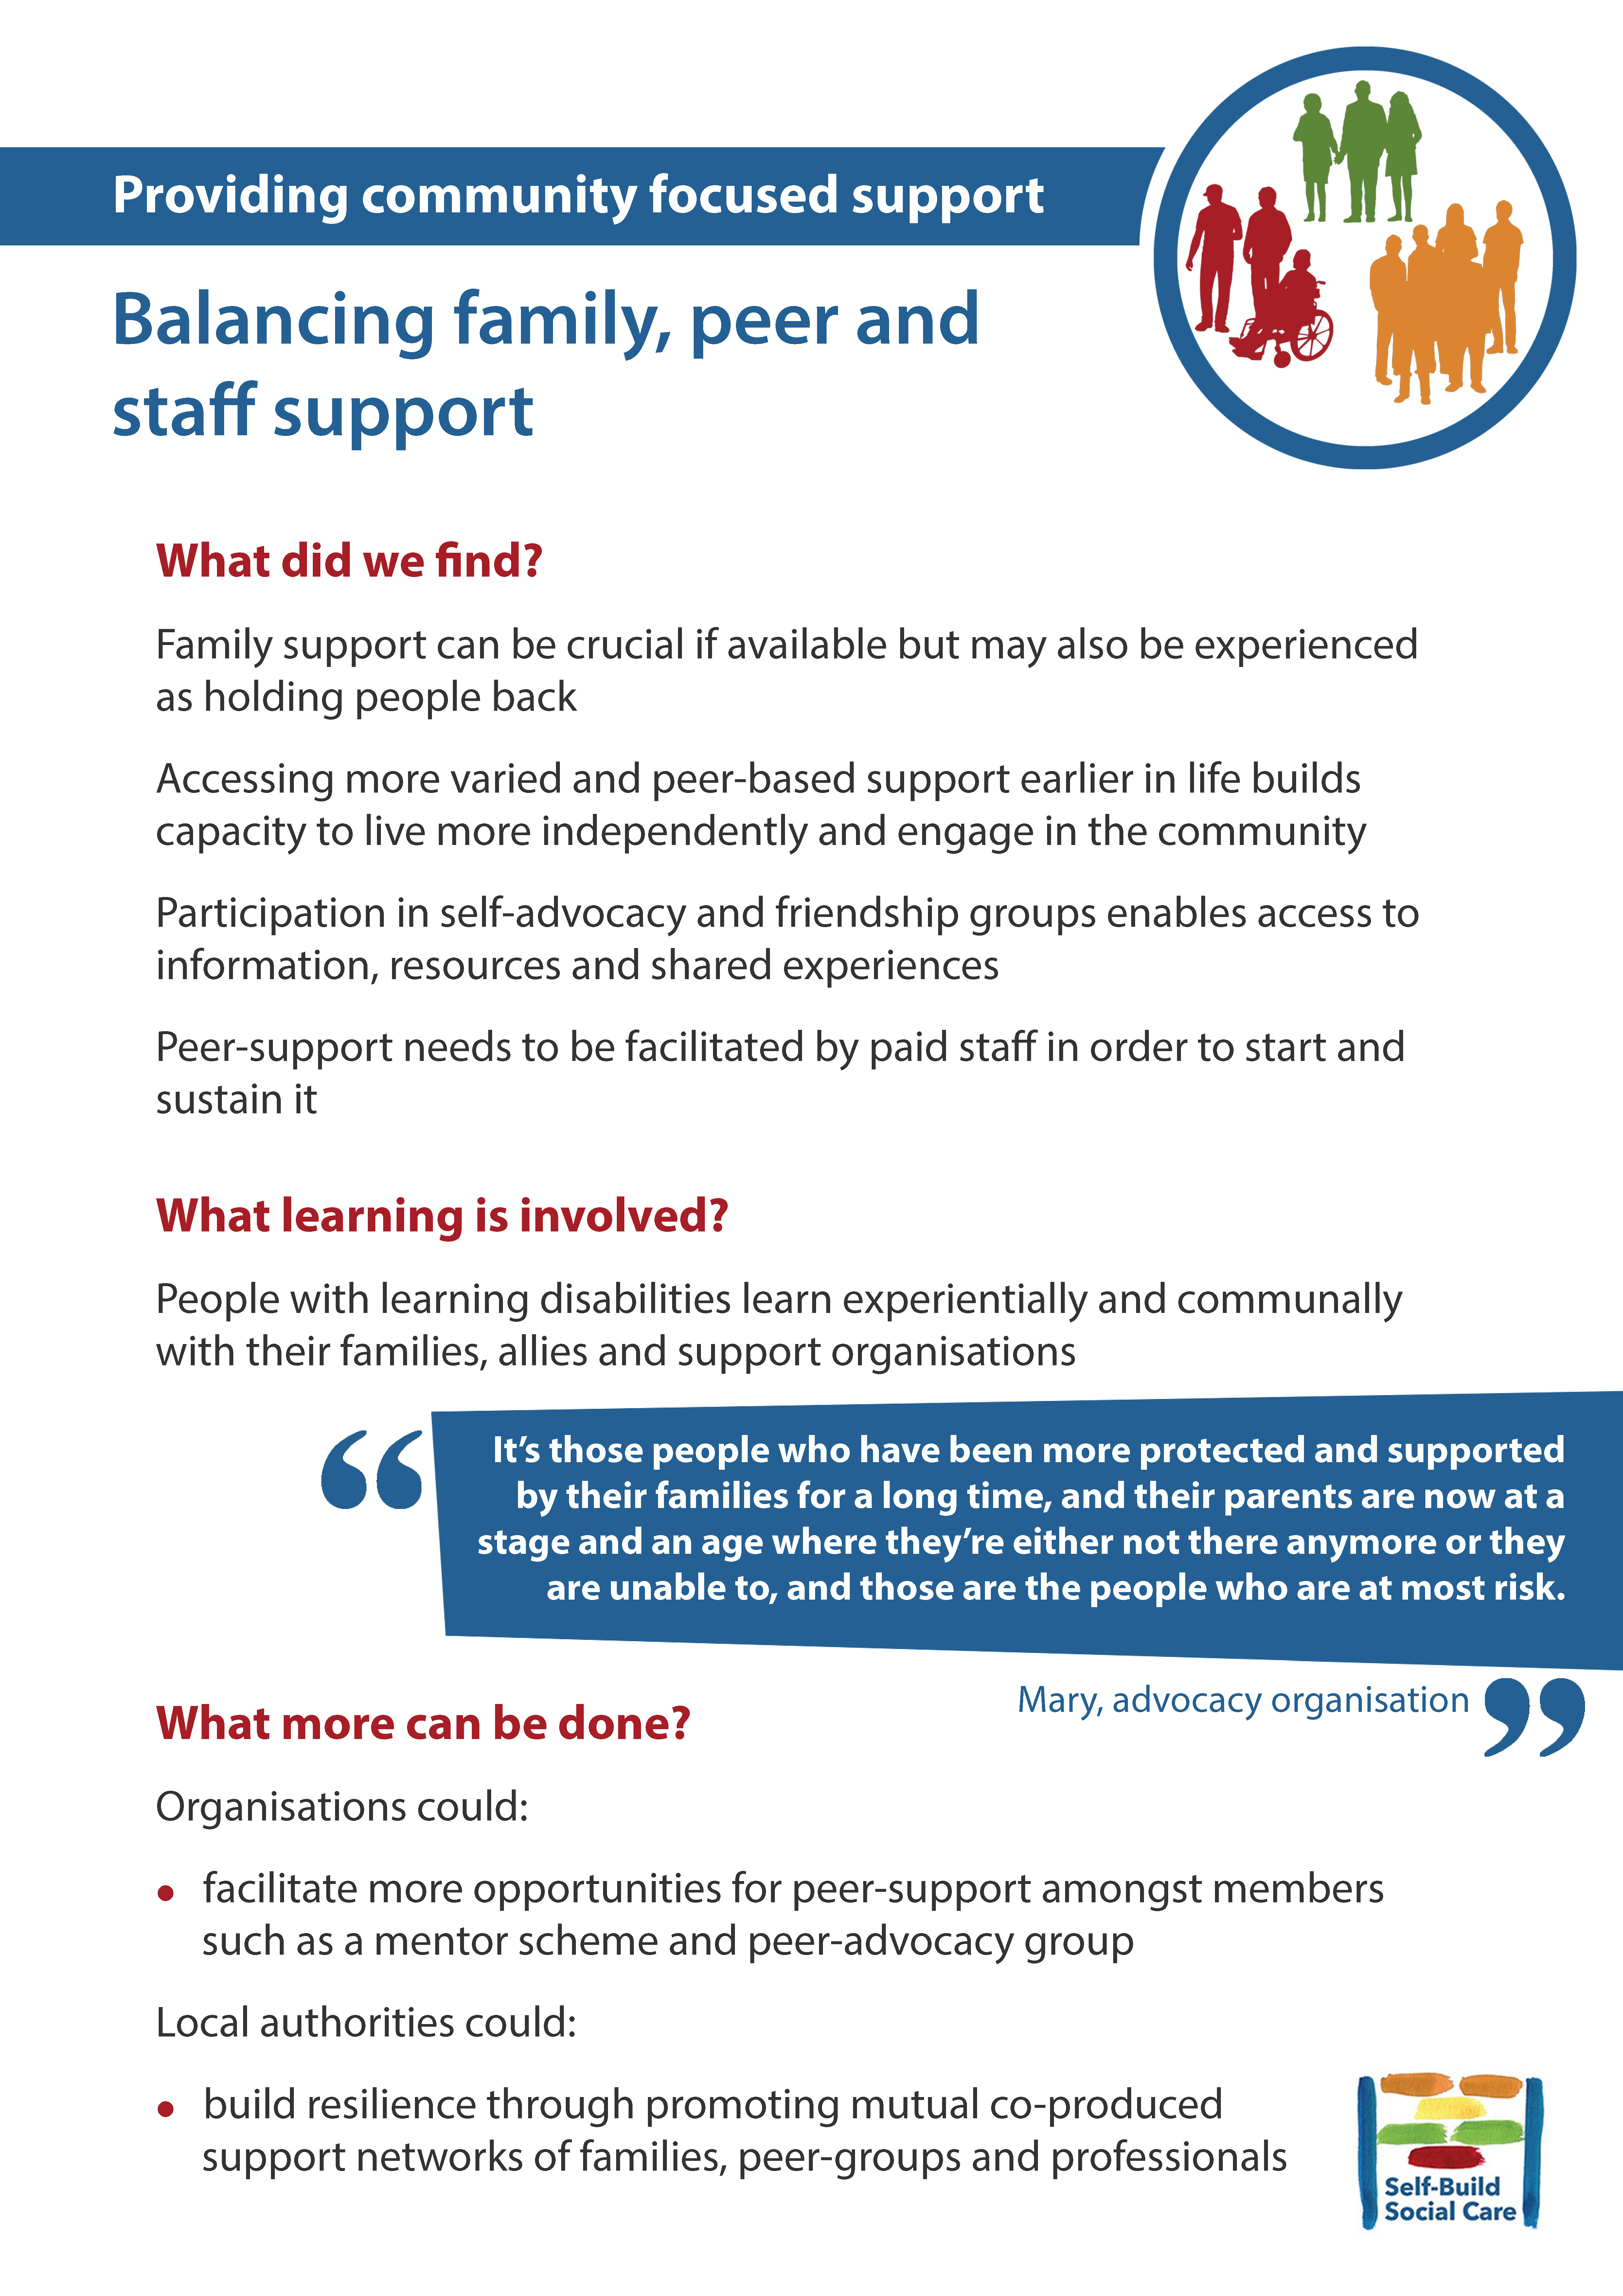 Balancing family, peer and staff support